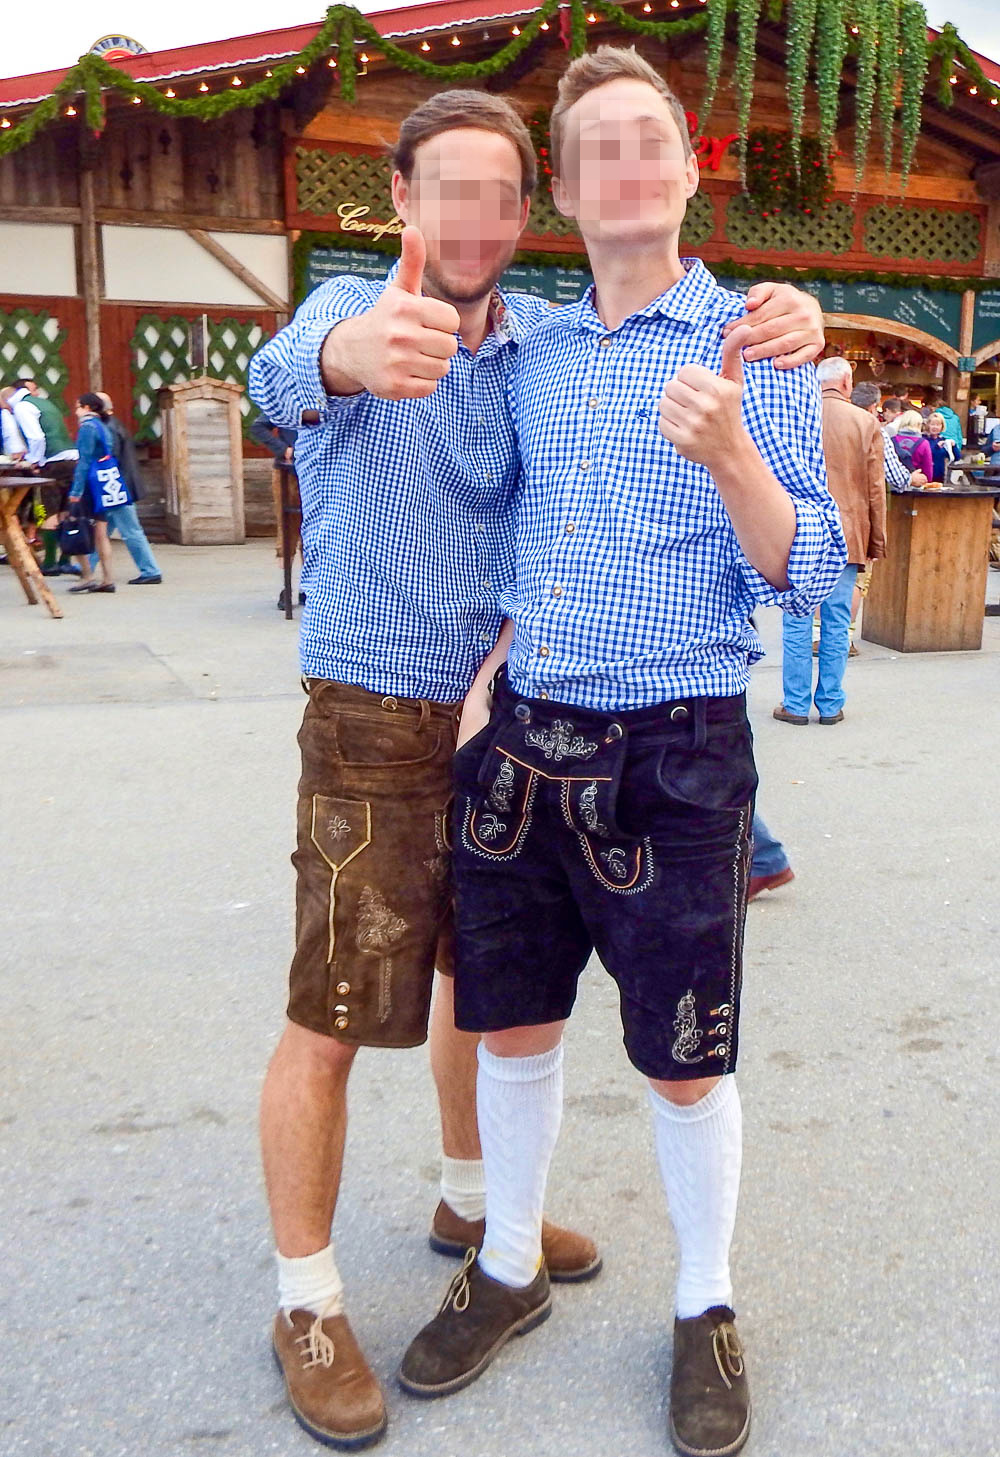 Traditional Oktoberfest Costumes | epicrally.co.uk